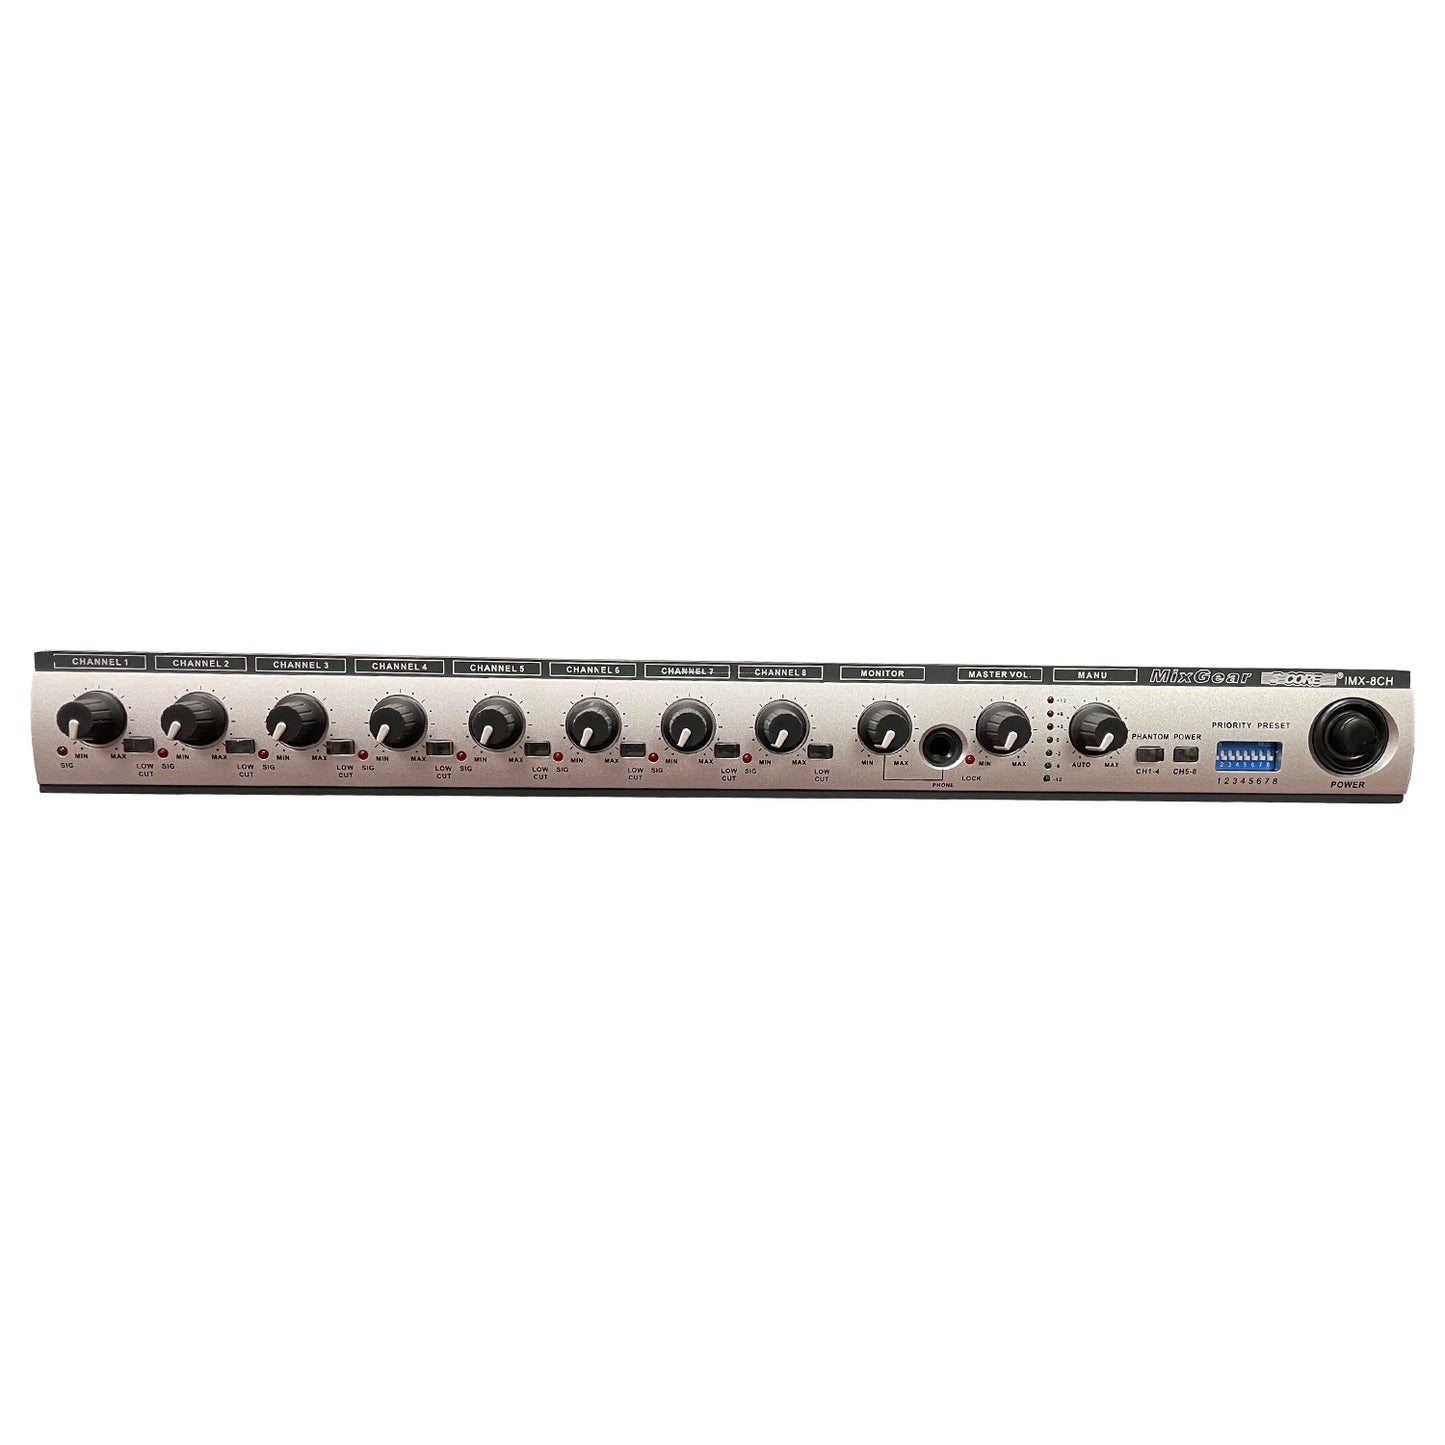 5 Core 8 channel Preamp Rackmount Mono Mic / Line, Phantom Power, Speech Priority, Master Volume, Balanced Outputs for Meeting, Speech, Concert, Public Events- IMX 8CH